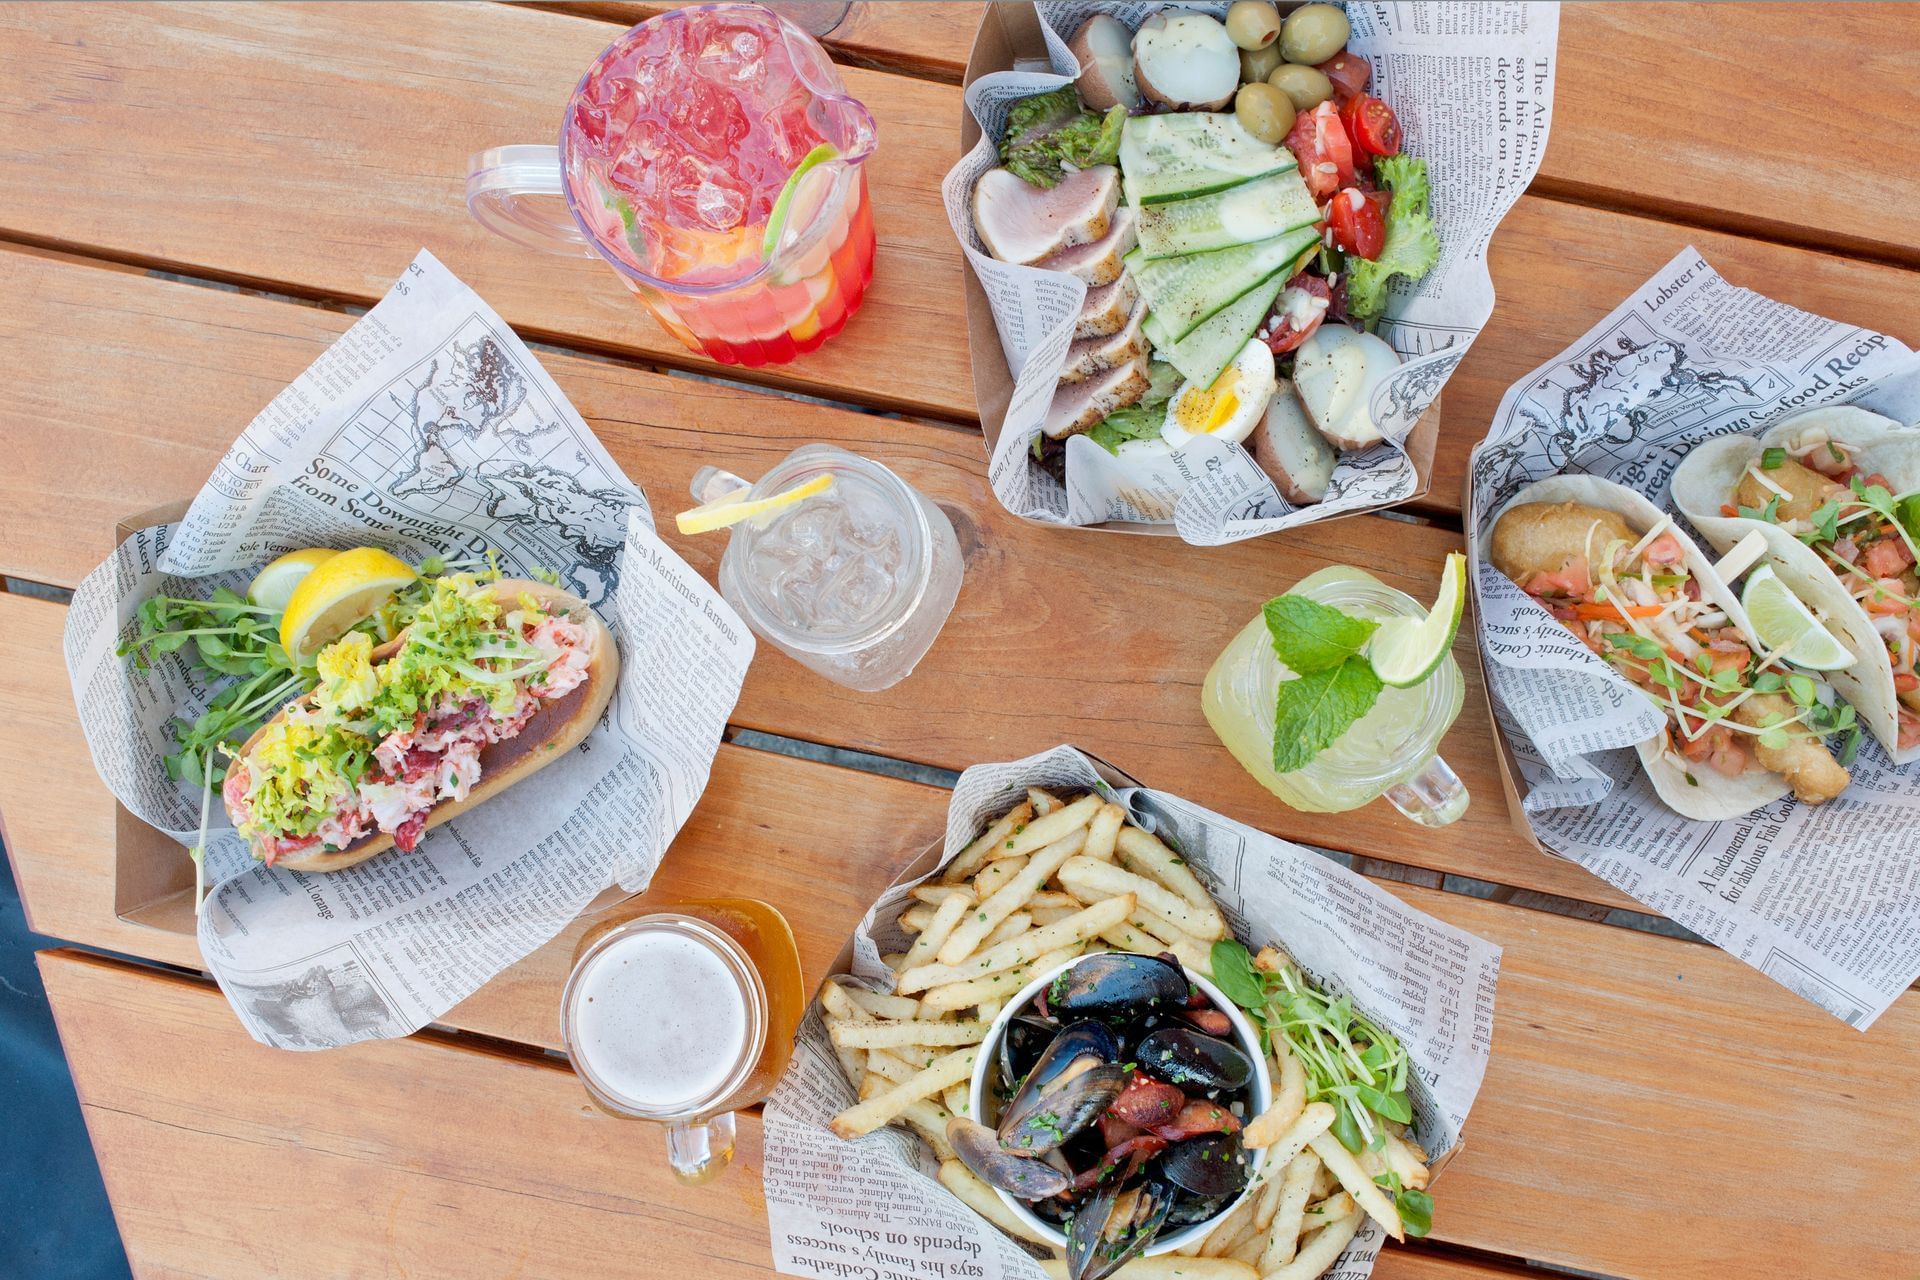 Lobster rolls, clams and fries, and fish tacos